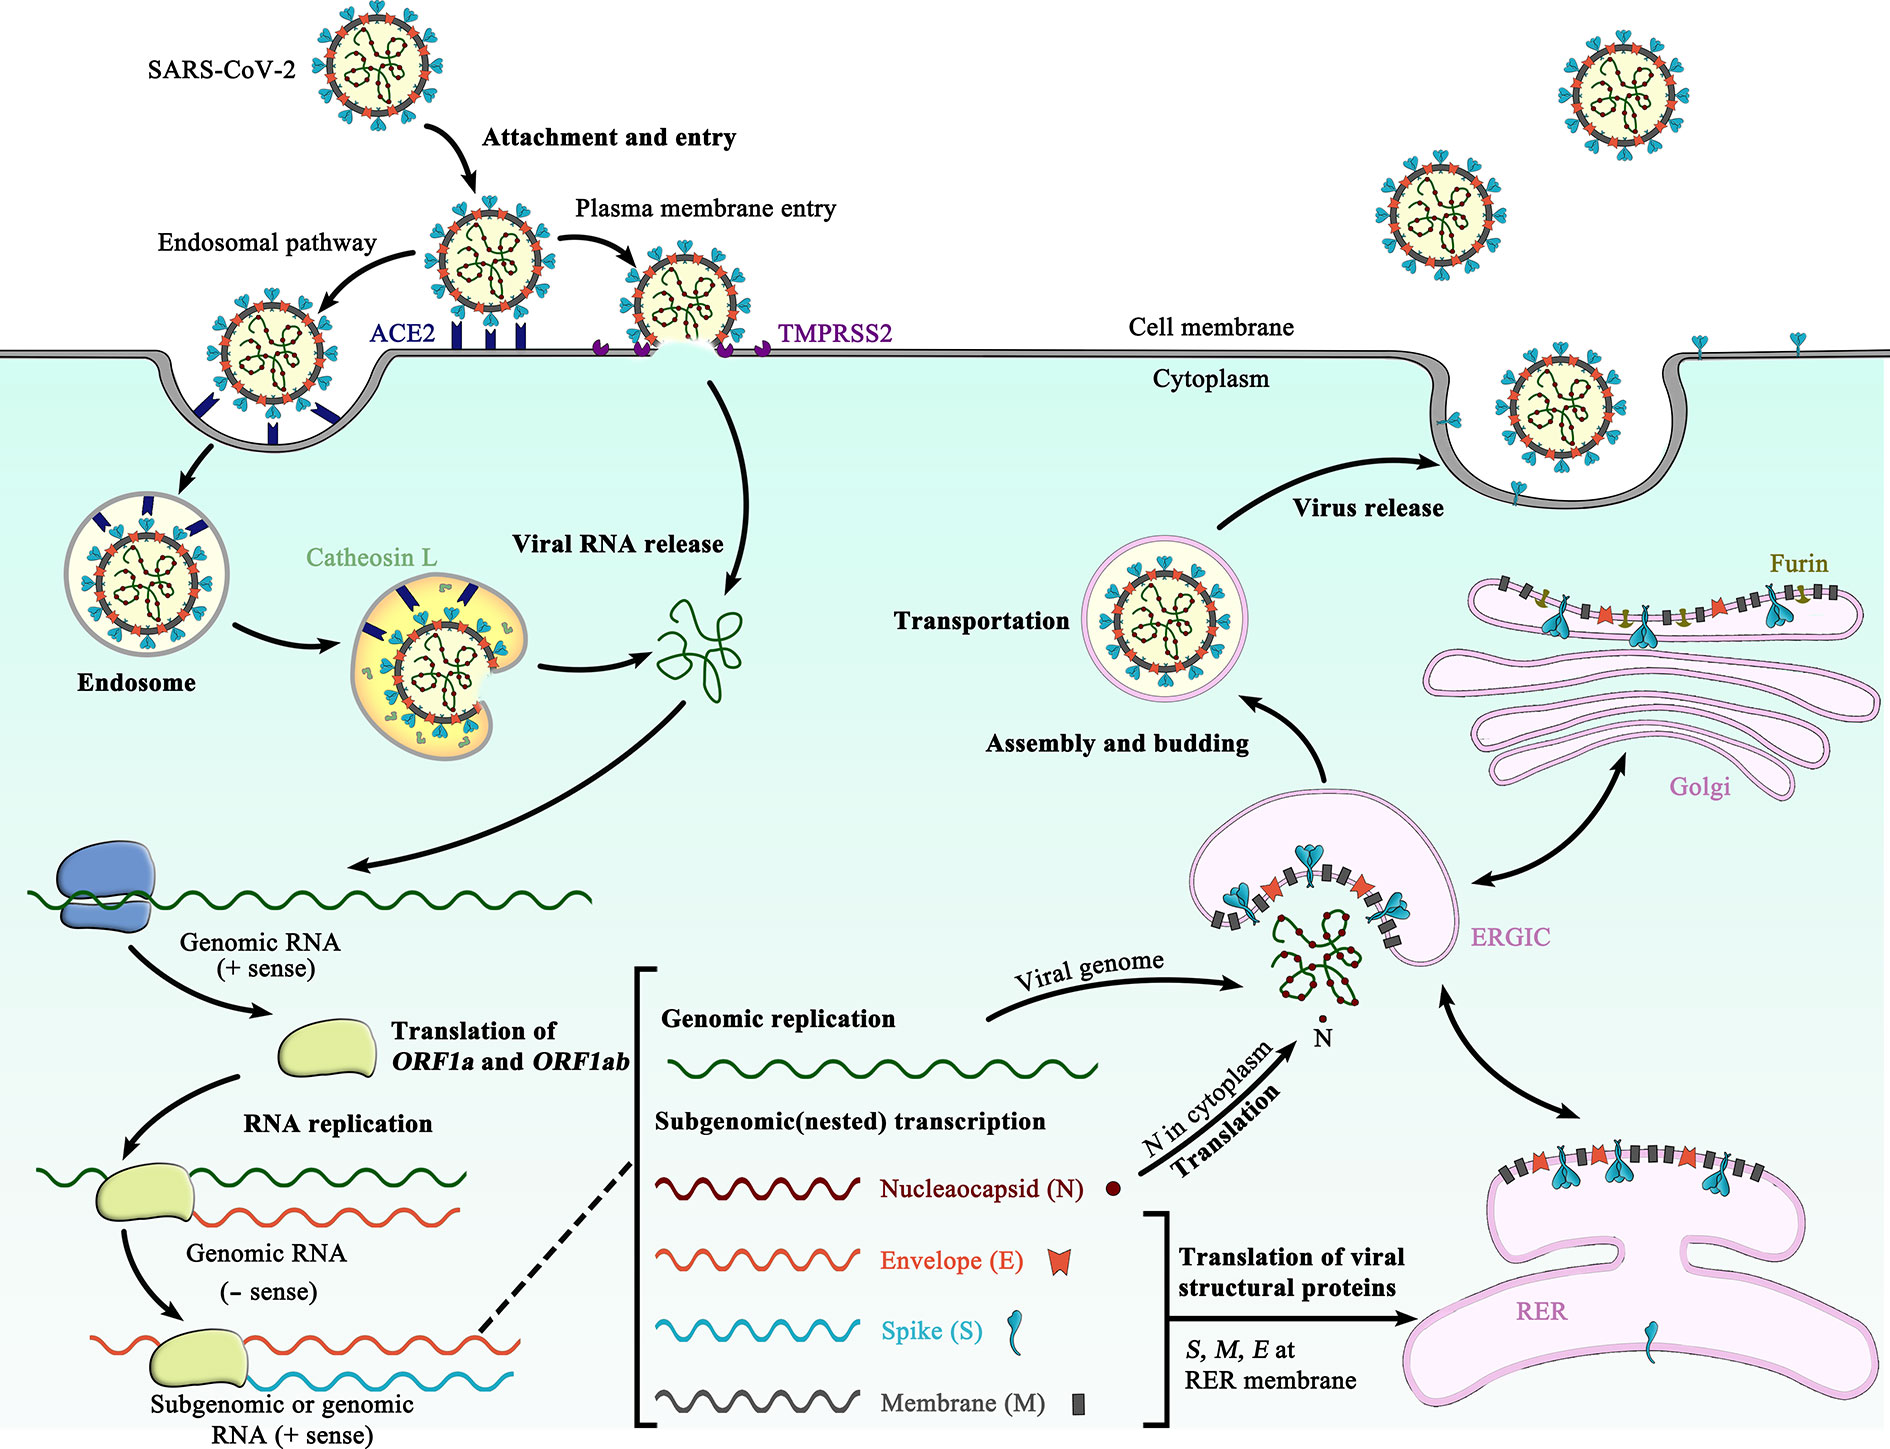 Frontiers The Sars Cov 2 Spike Glycoprotein Biosynthesis Structure Function And Antigenicity Implications For The Design Of Spike Based Vaccine Immunogens Immunology